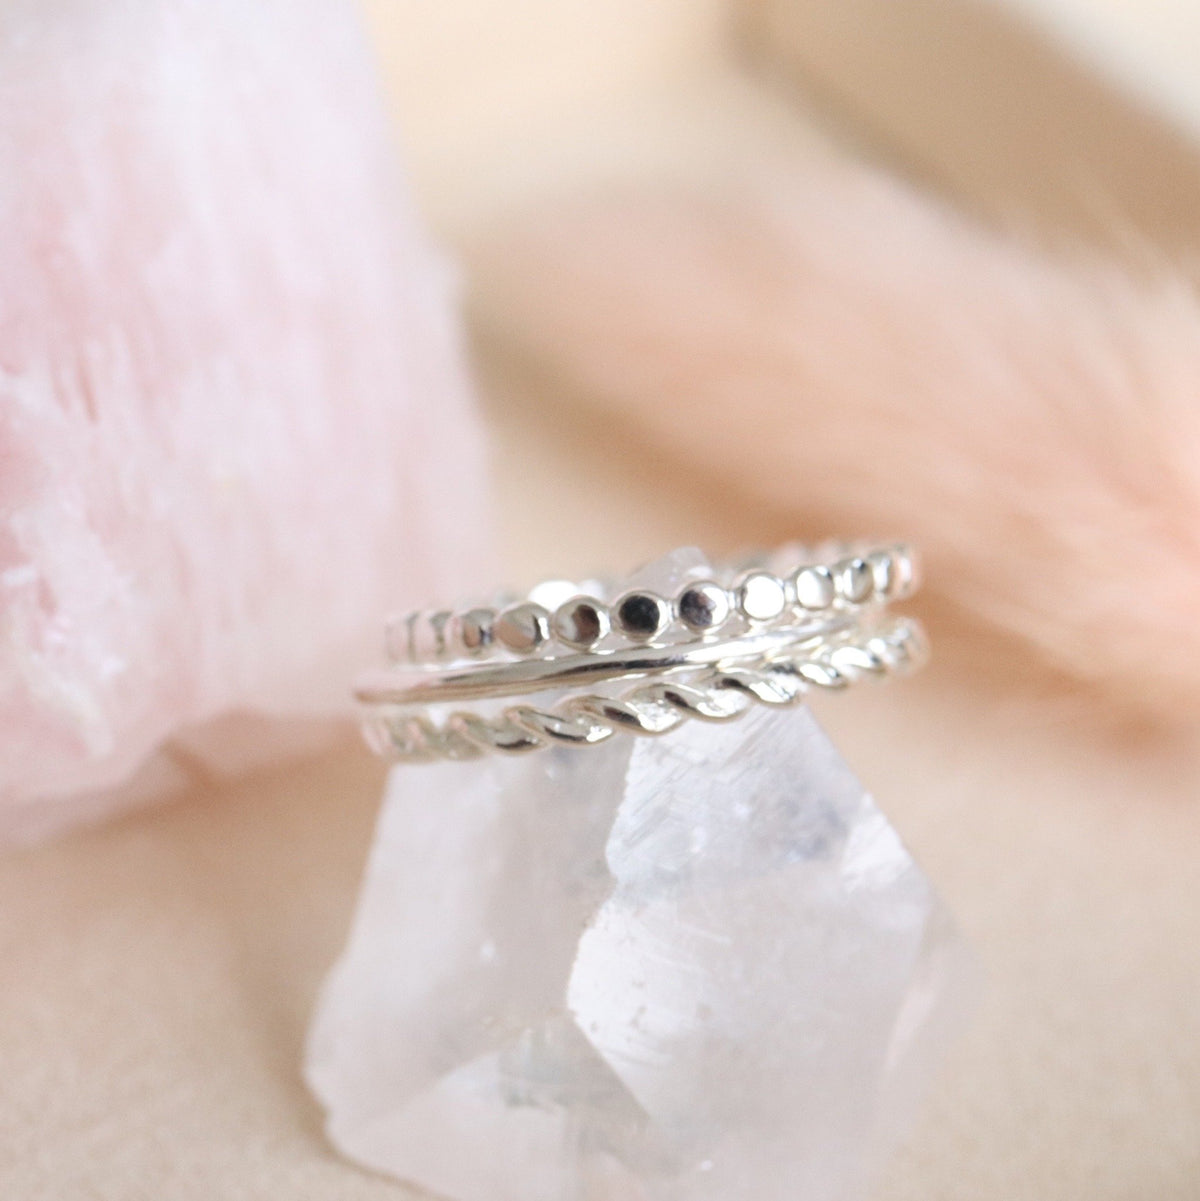 POISE THIN BAND RING - SILVER - SO PRETTY CARA COTTER